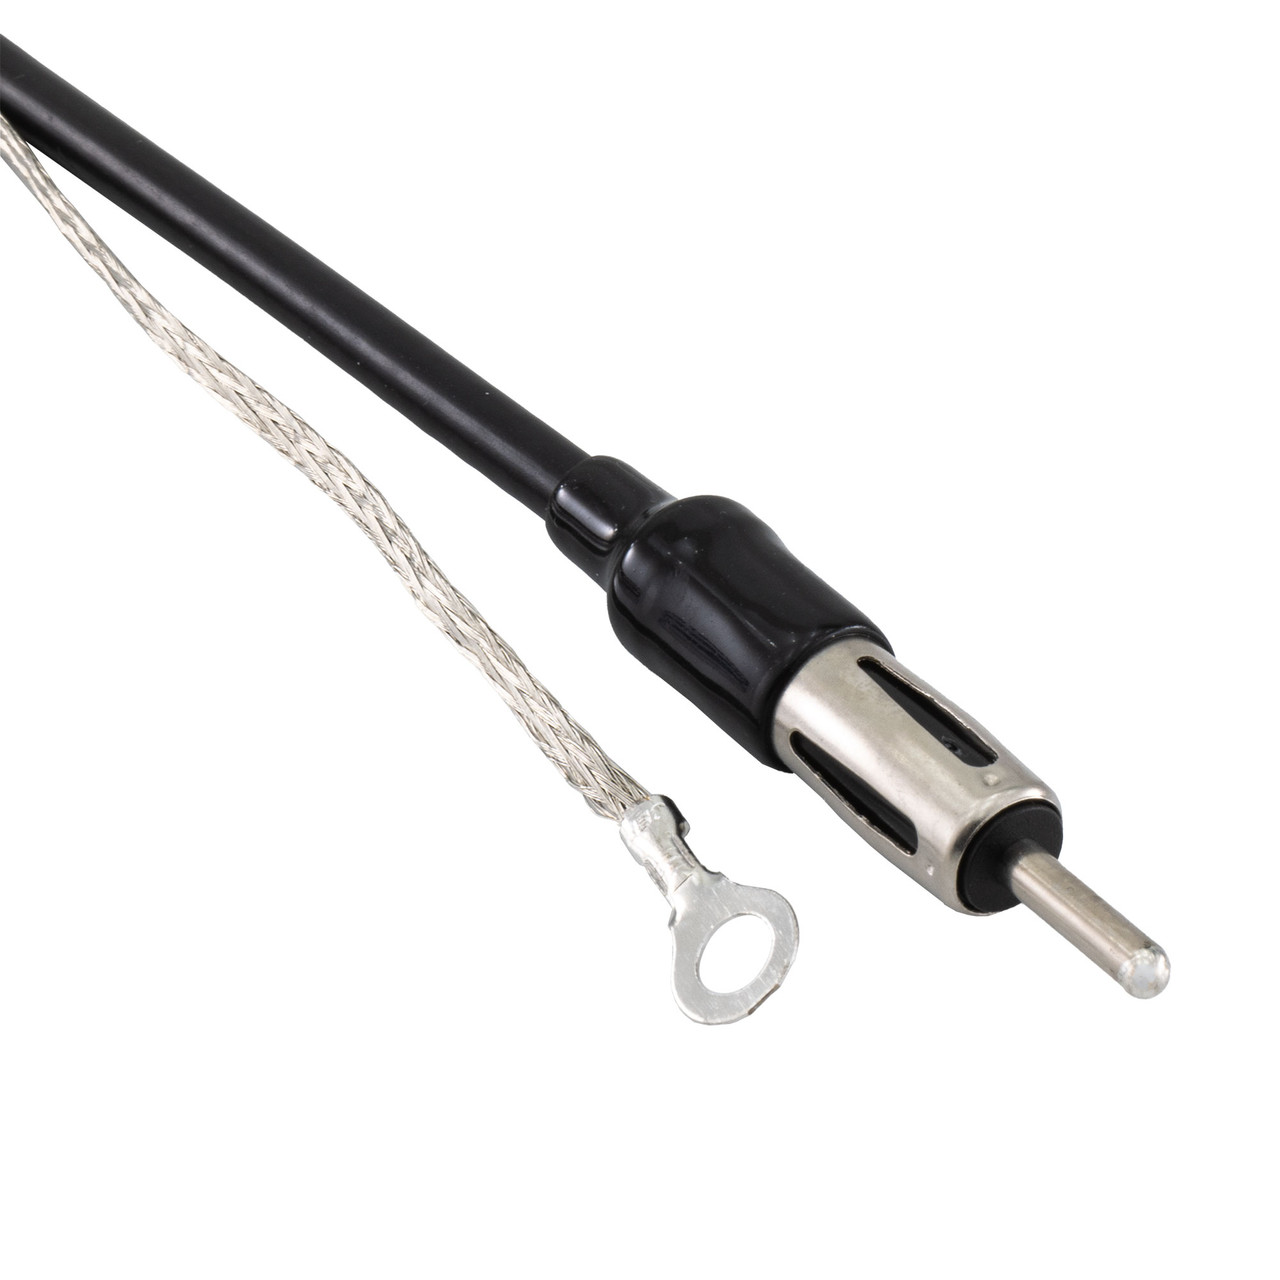 RV AM/FM Rubber Mast Antenna with 72 Cable